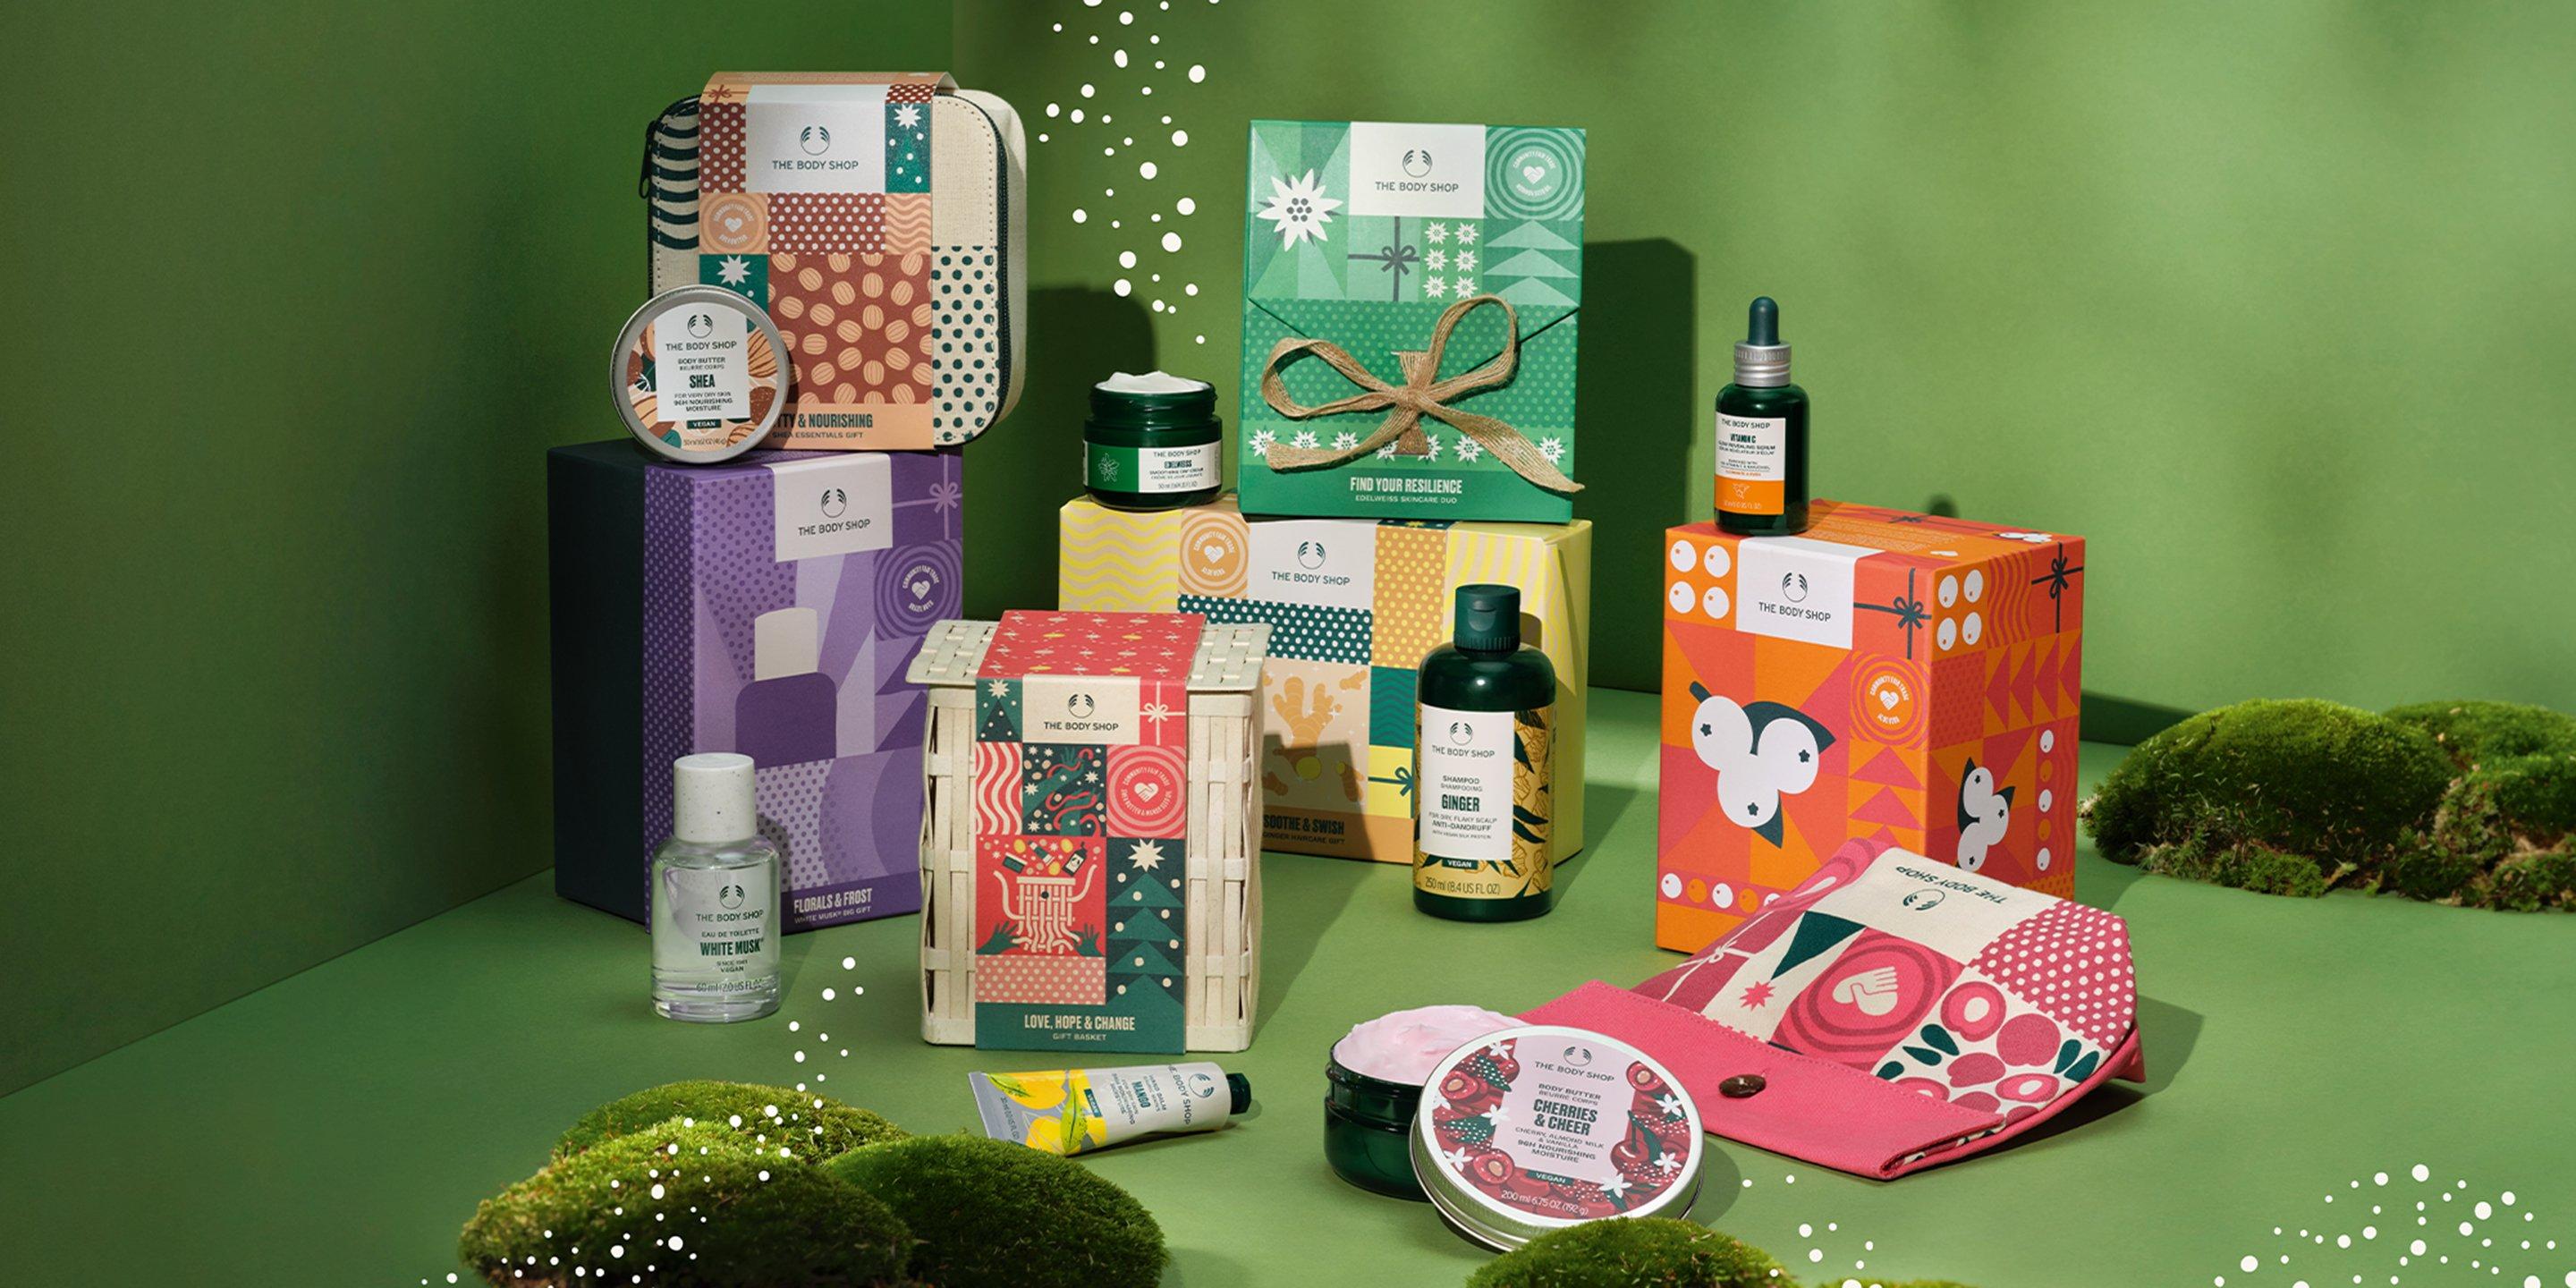 Exchange - Happening Right Now, The Body Shop After Christmas Sale! Up to  50% Off Gift Sets!